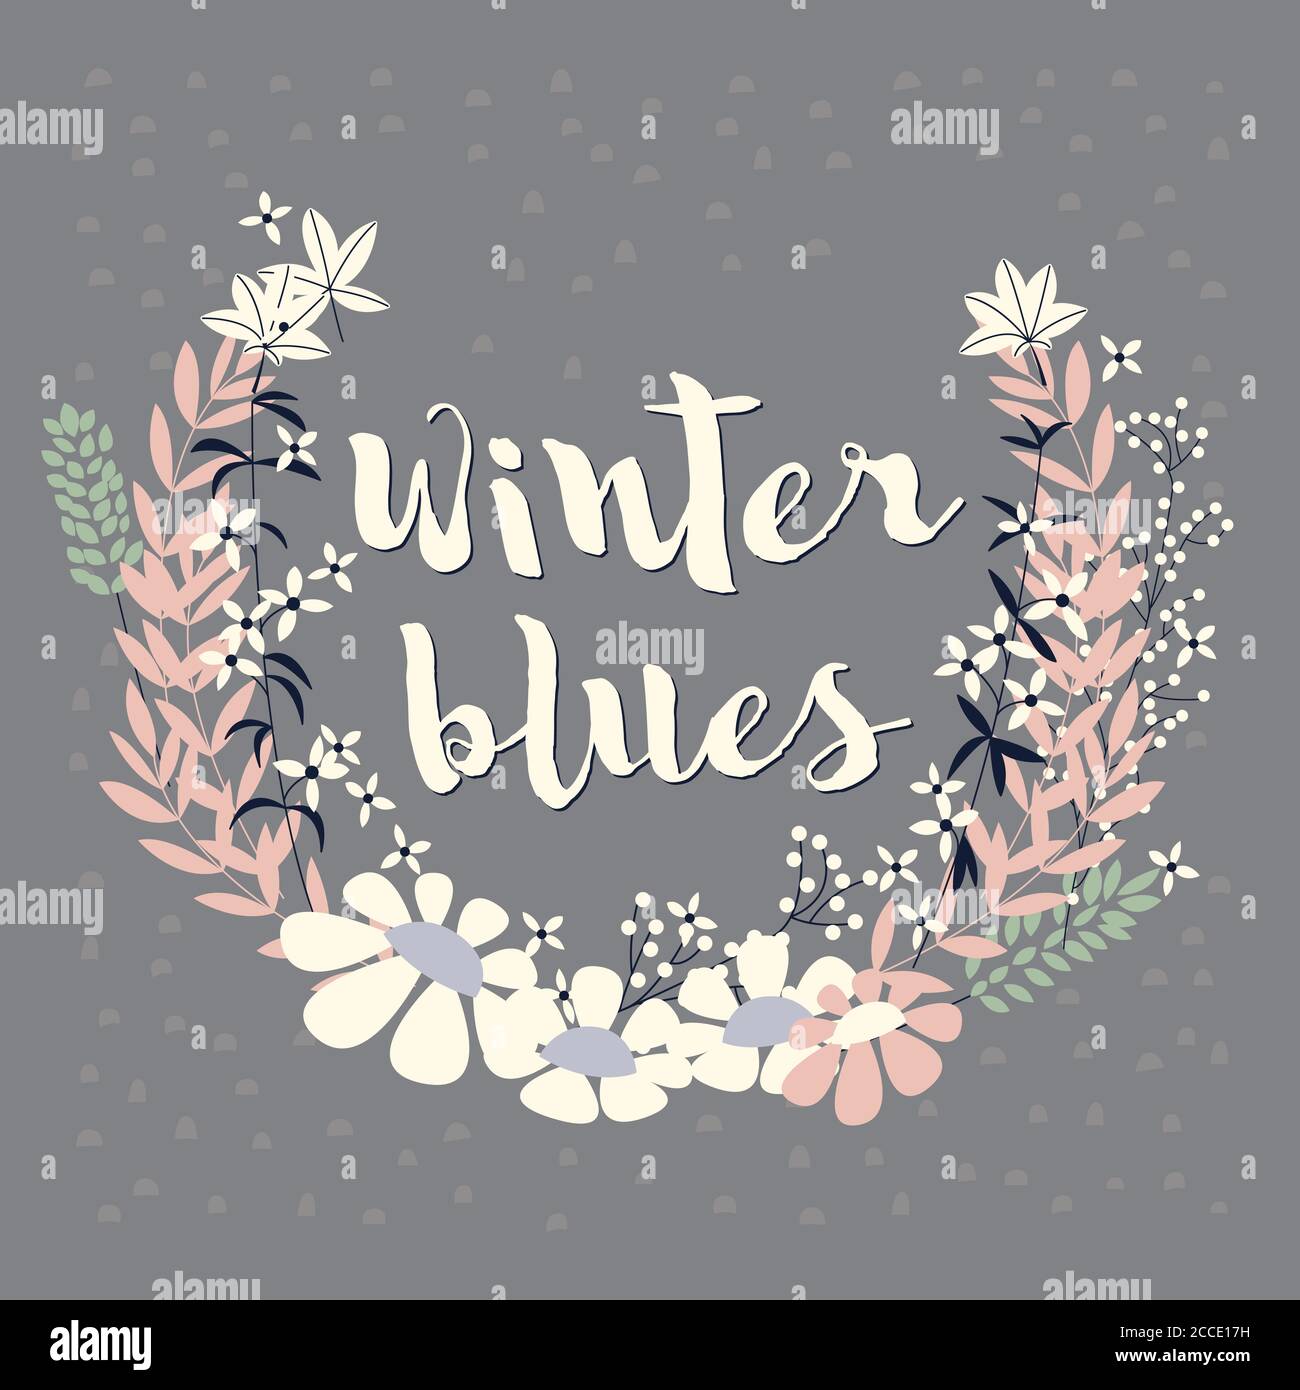 Colorful collection of winter floral arrangement and flowers for invitation, wedding or greeting cards, vector illustration Stock Vector